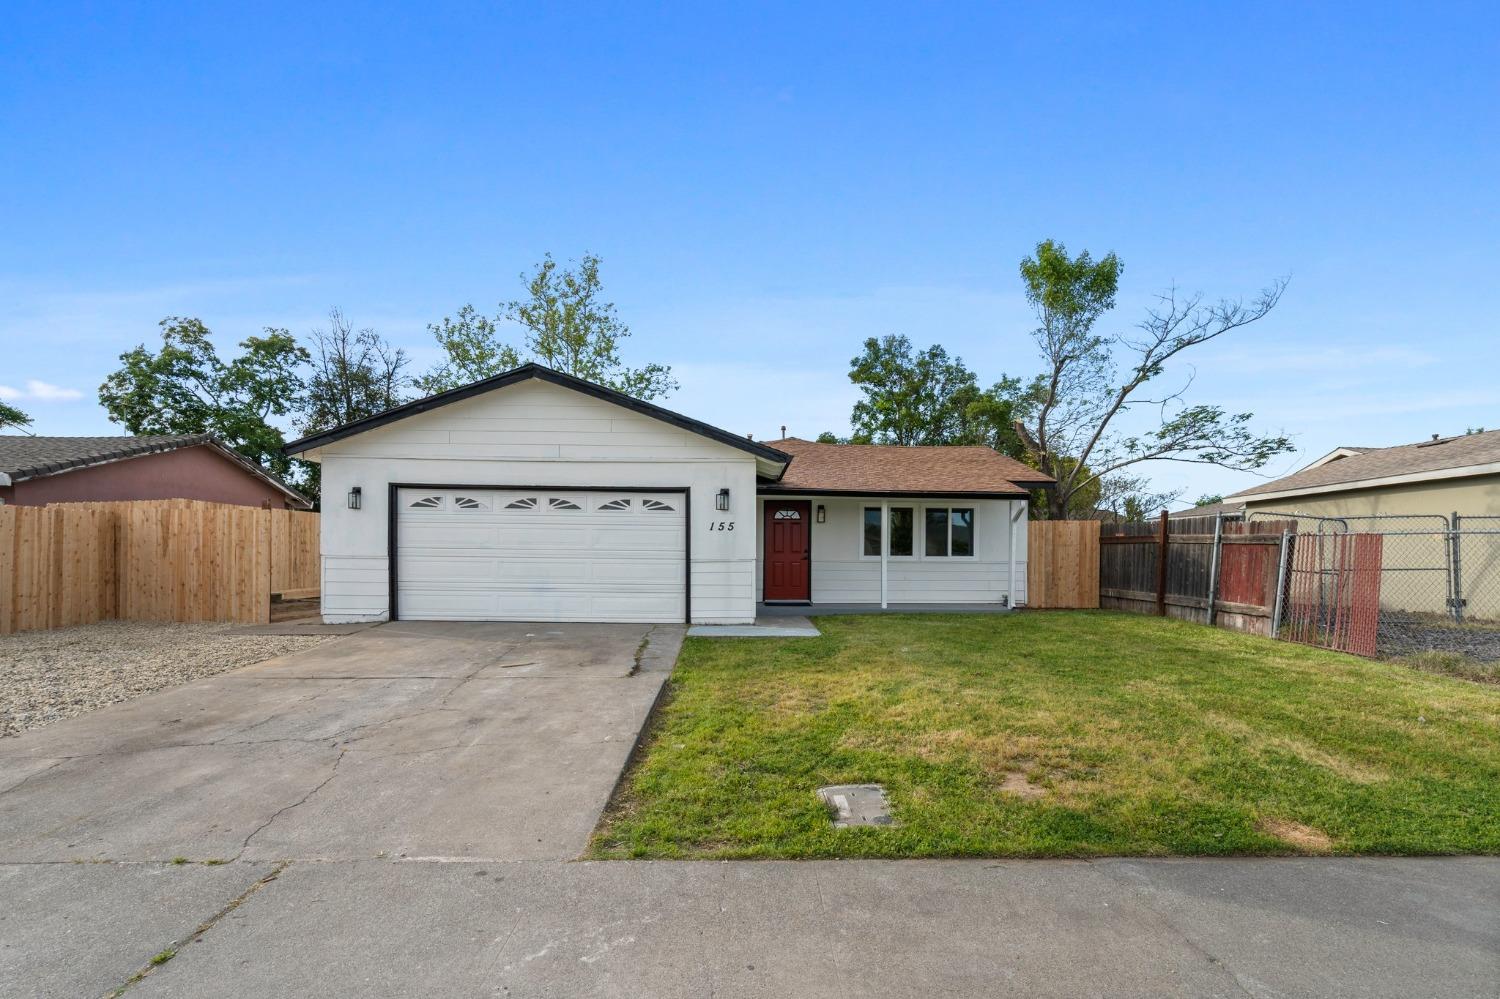 Photo of 155 Olmstead Dr in Sacramento, CA